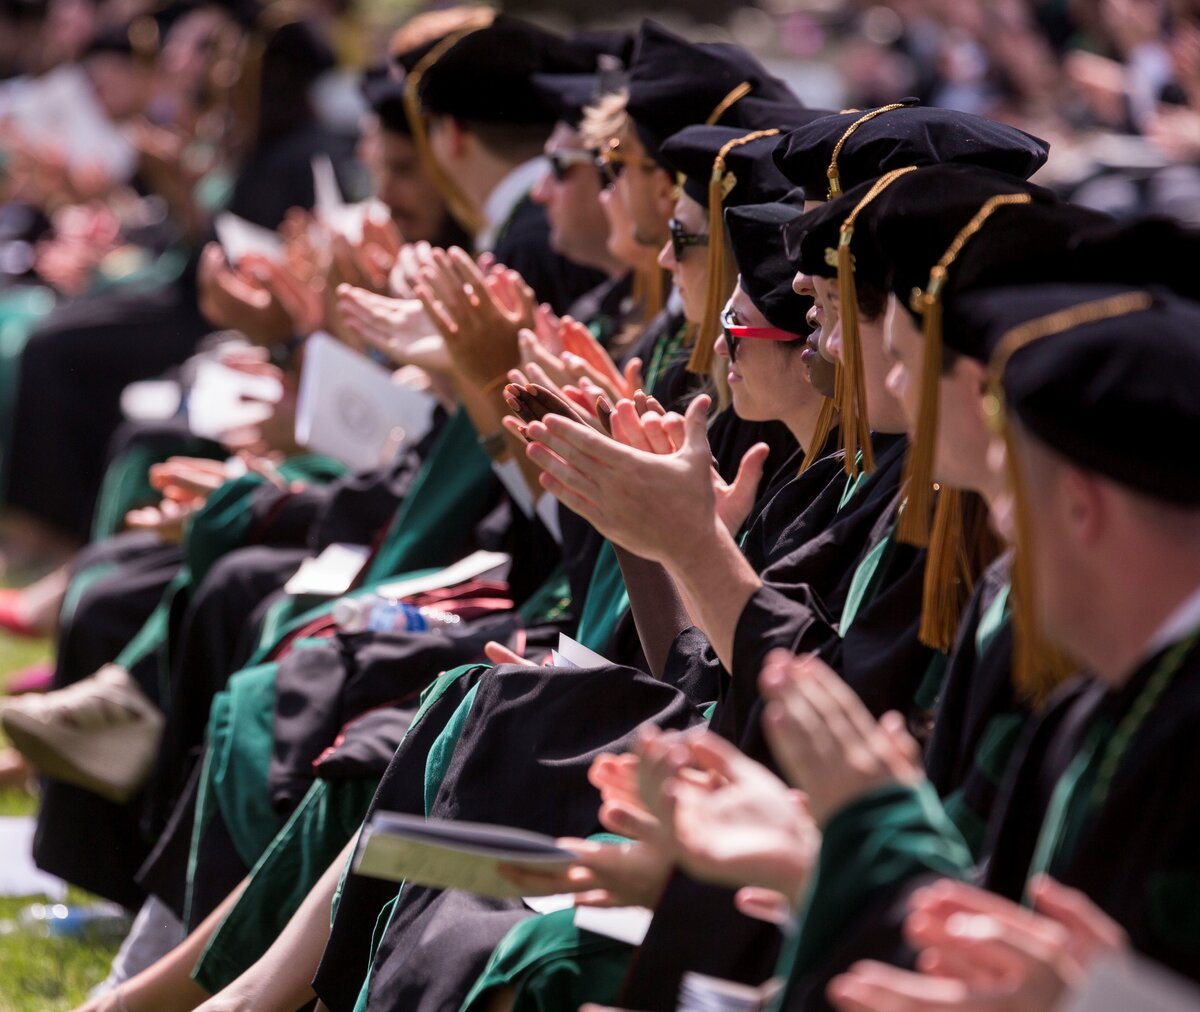 A group of CMSRU graduates clapping while sitting in regalia at a CMSRU Commencement ceremony.